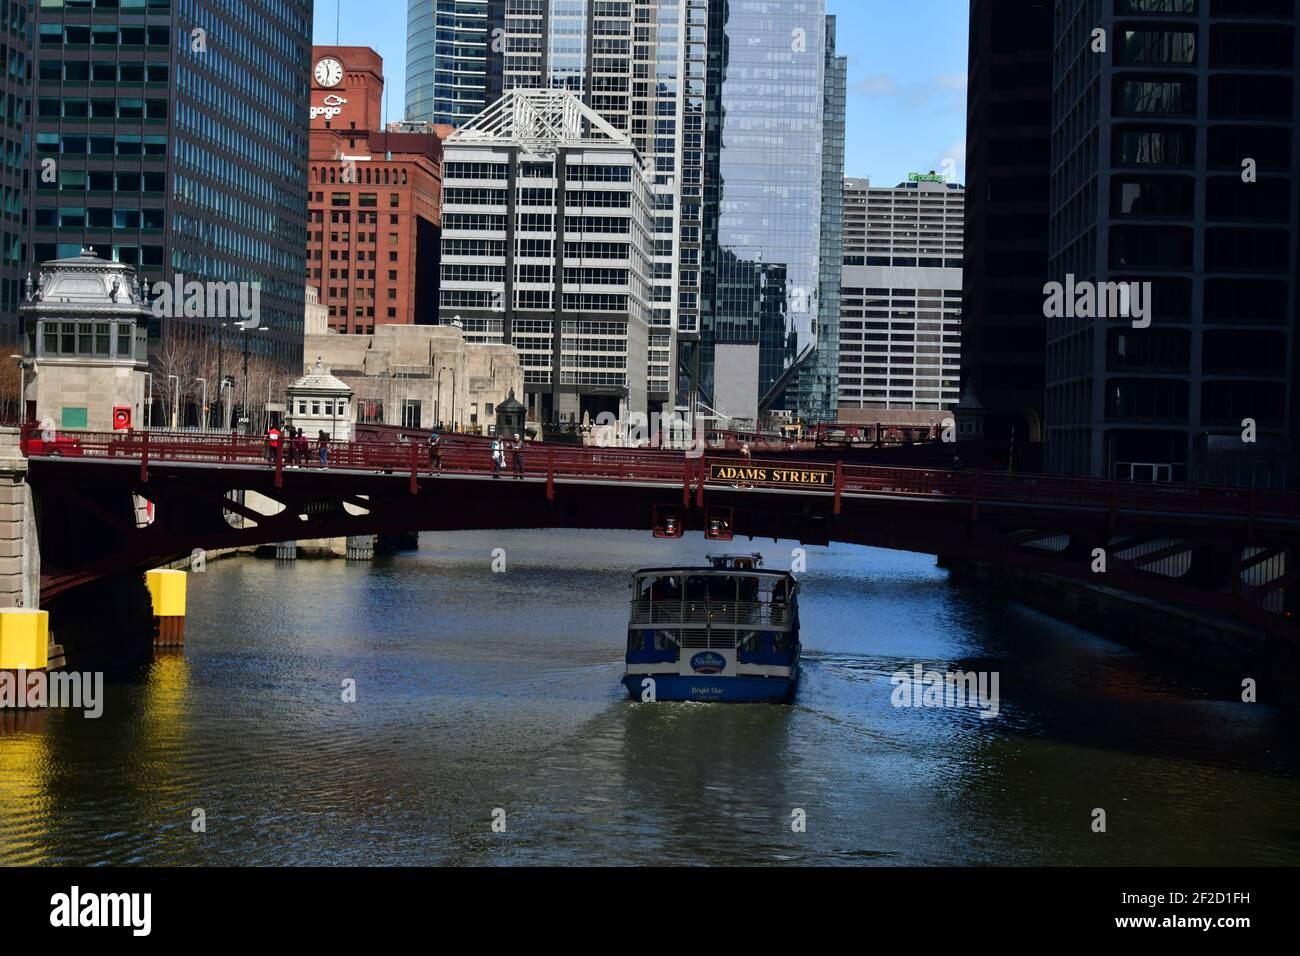 View from Jackson Boulevard to Adams Street at Chicago Downtown Stock Photo